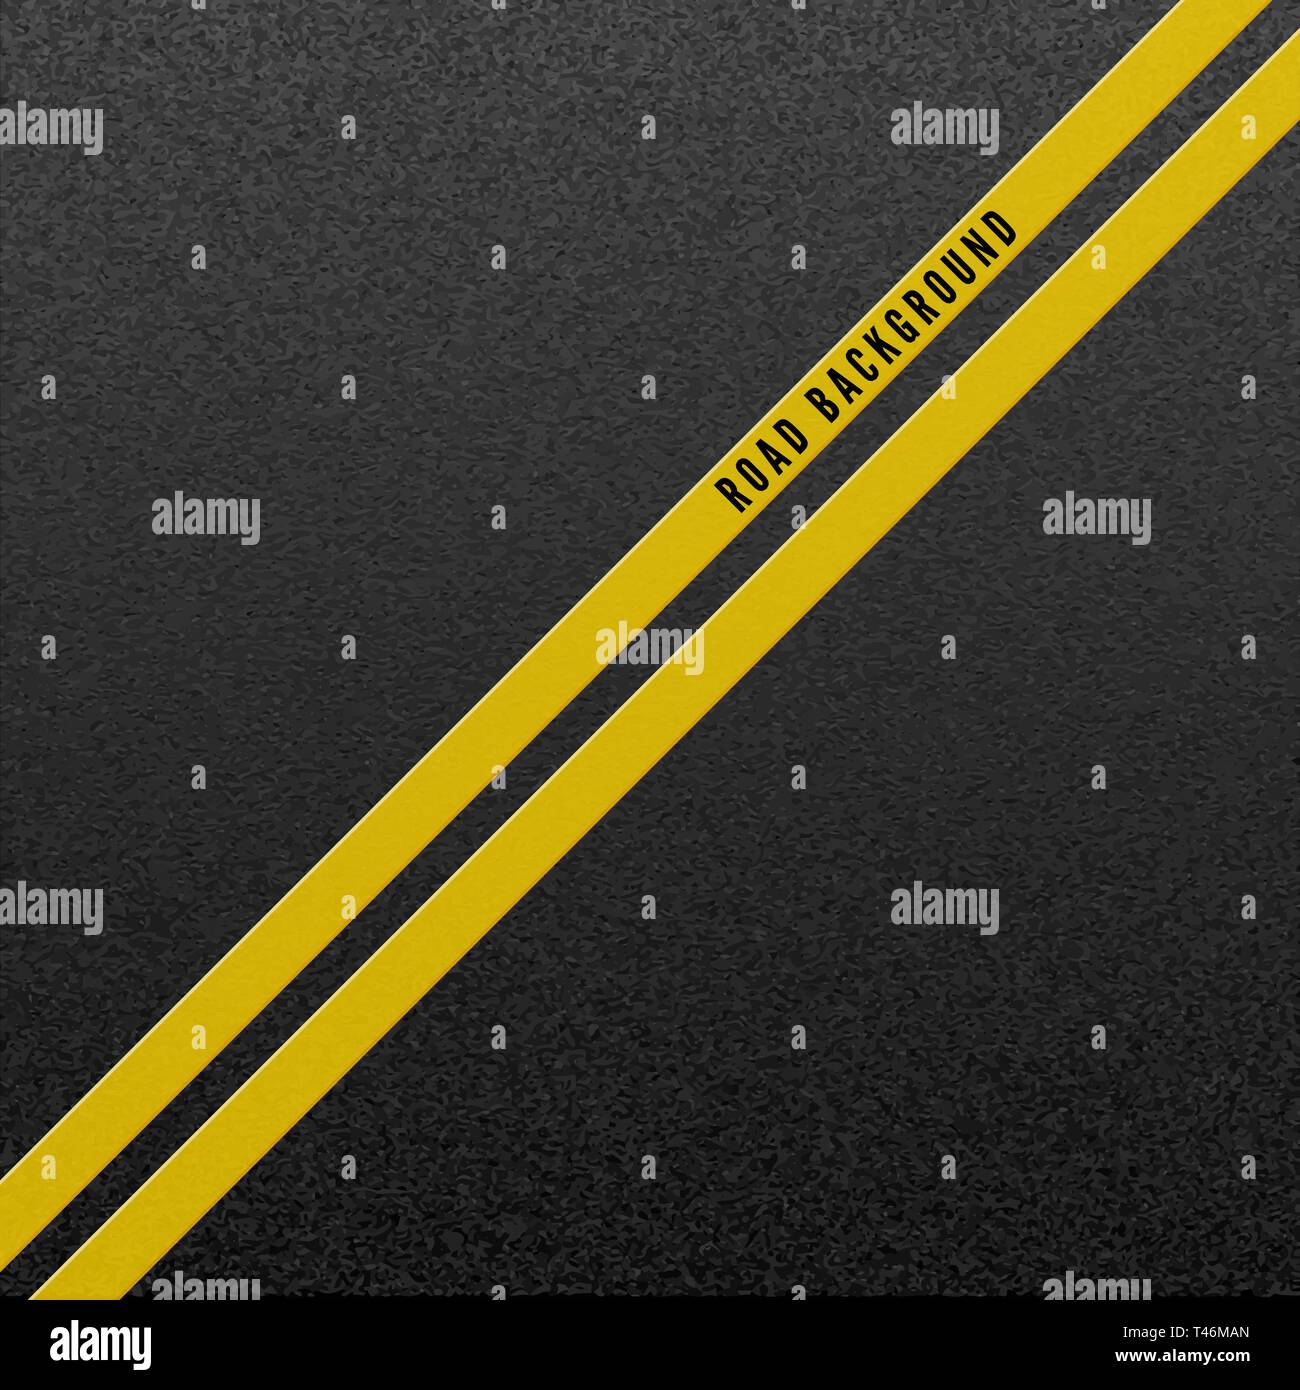 Abstract road background. Structure of granular asphalt. Asphalt texture with two yellow line road marking. Vector illustration Stock Vector